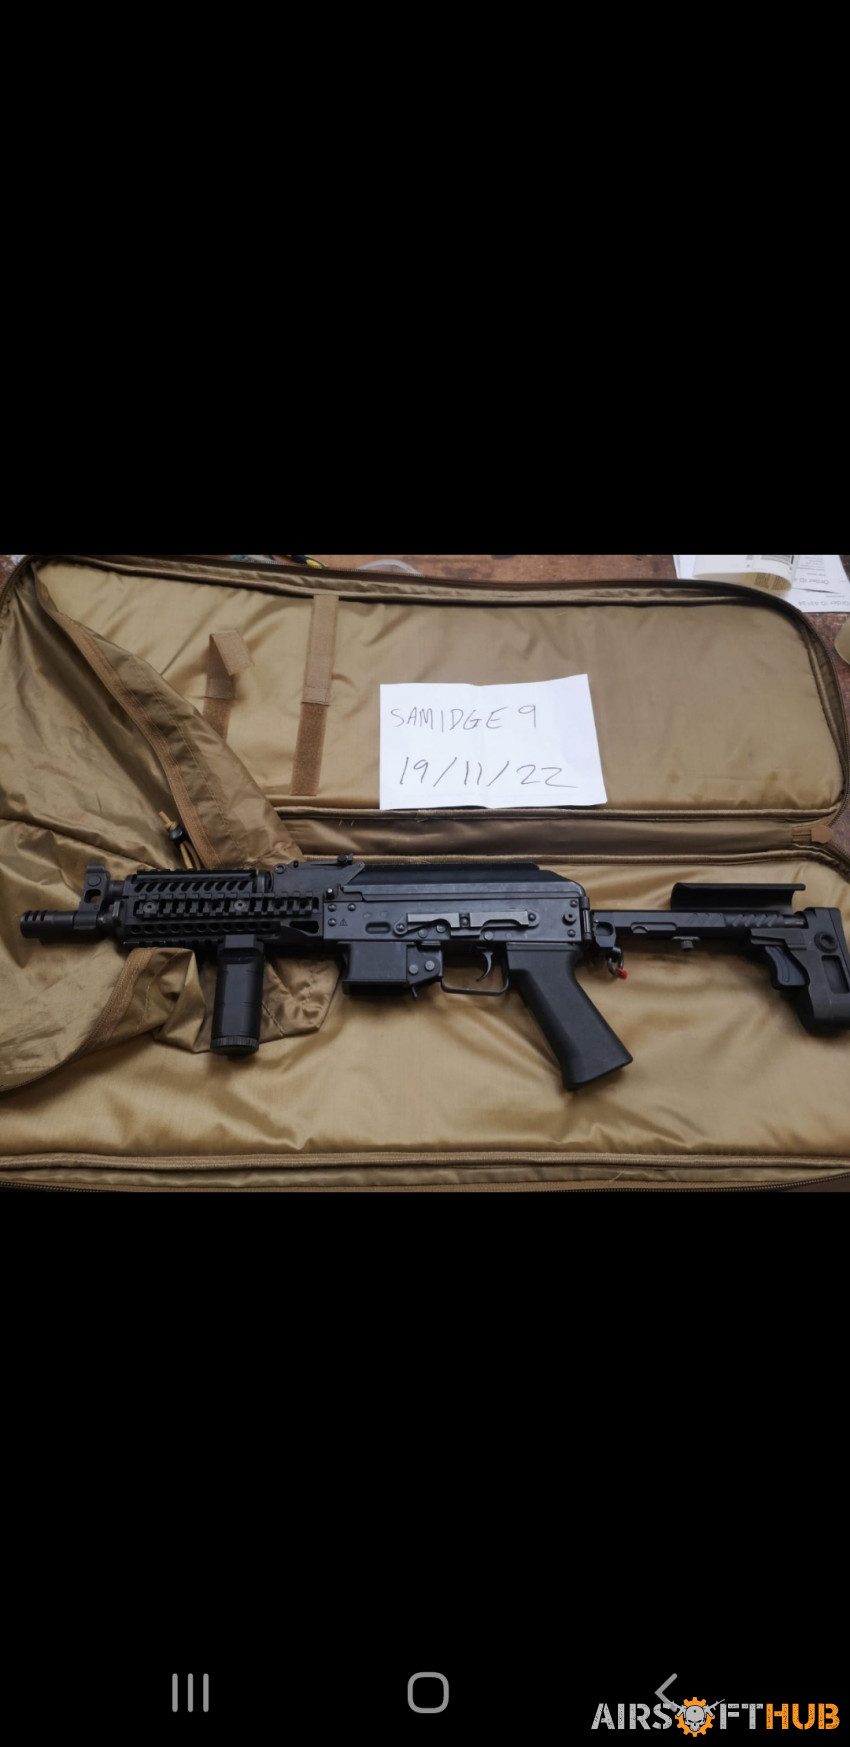 LCT PP19 - Used airsoft equipment